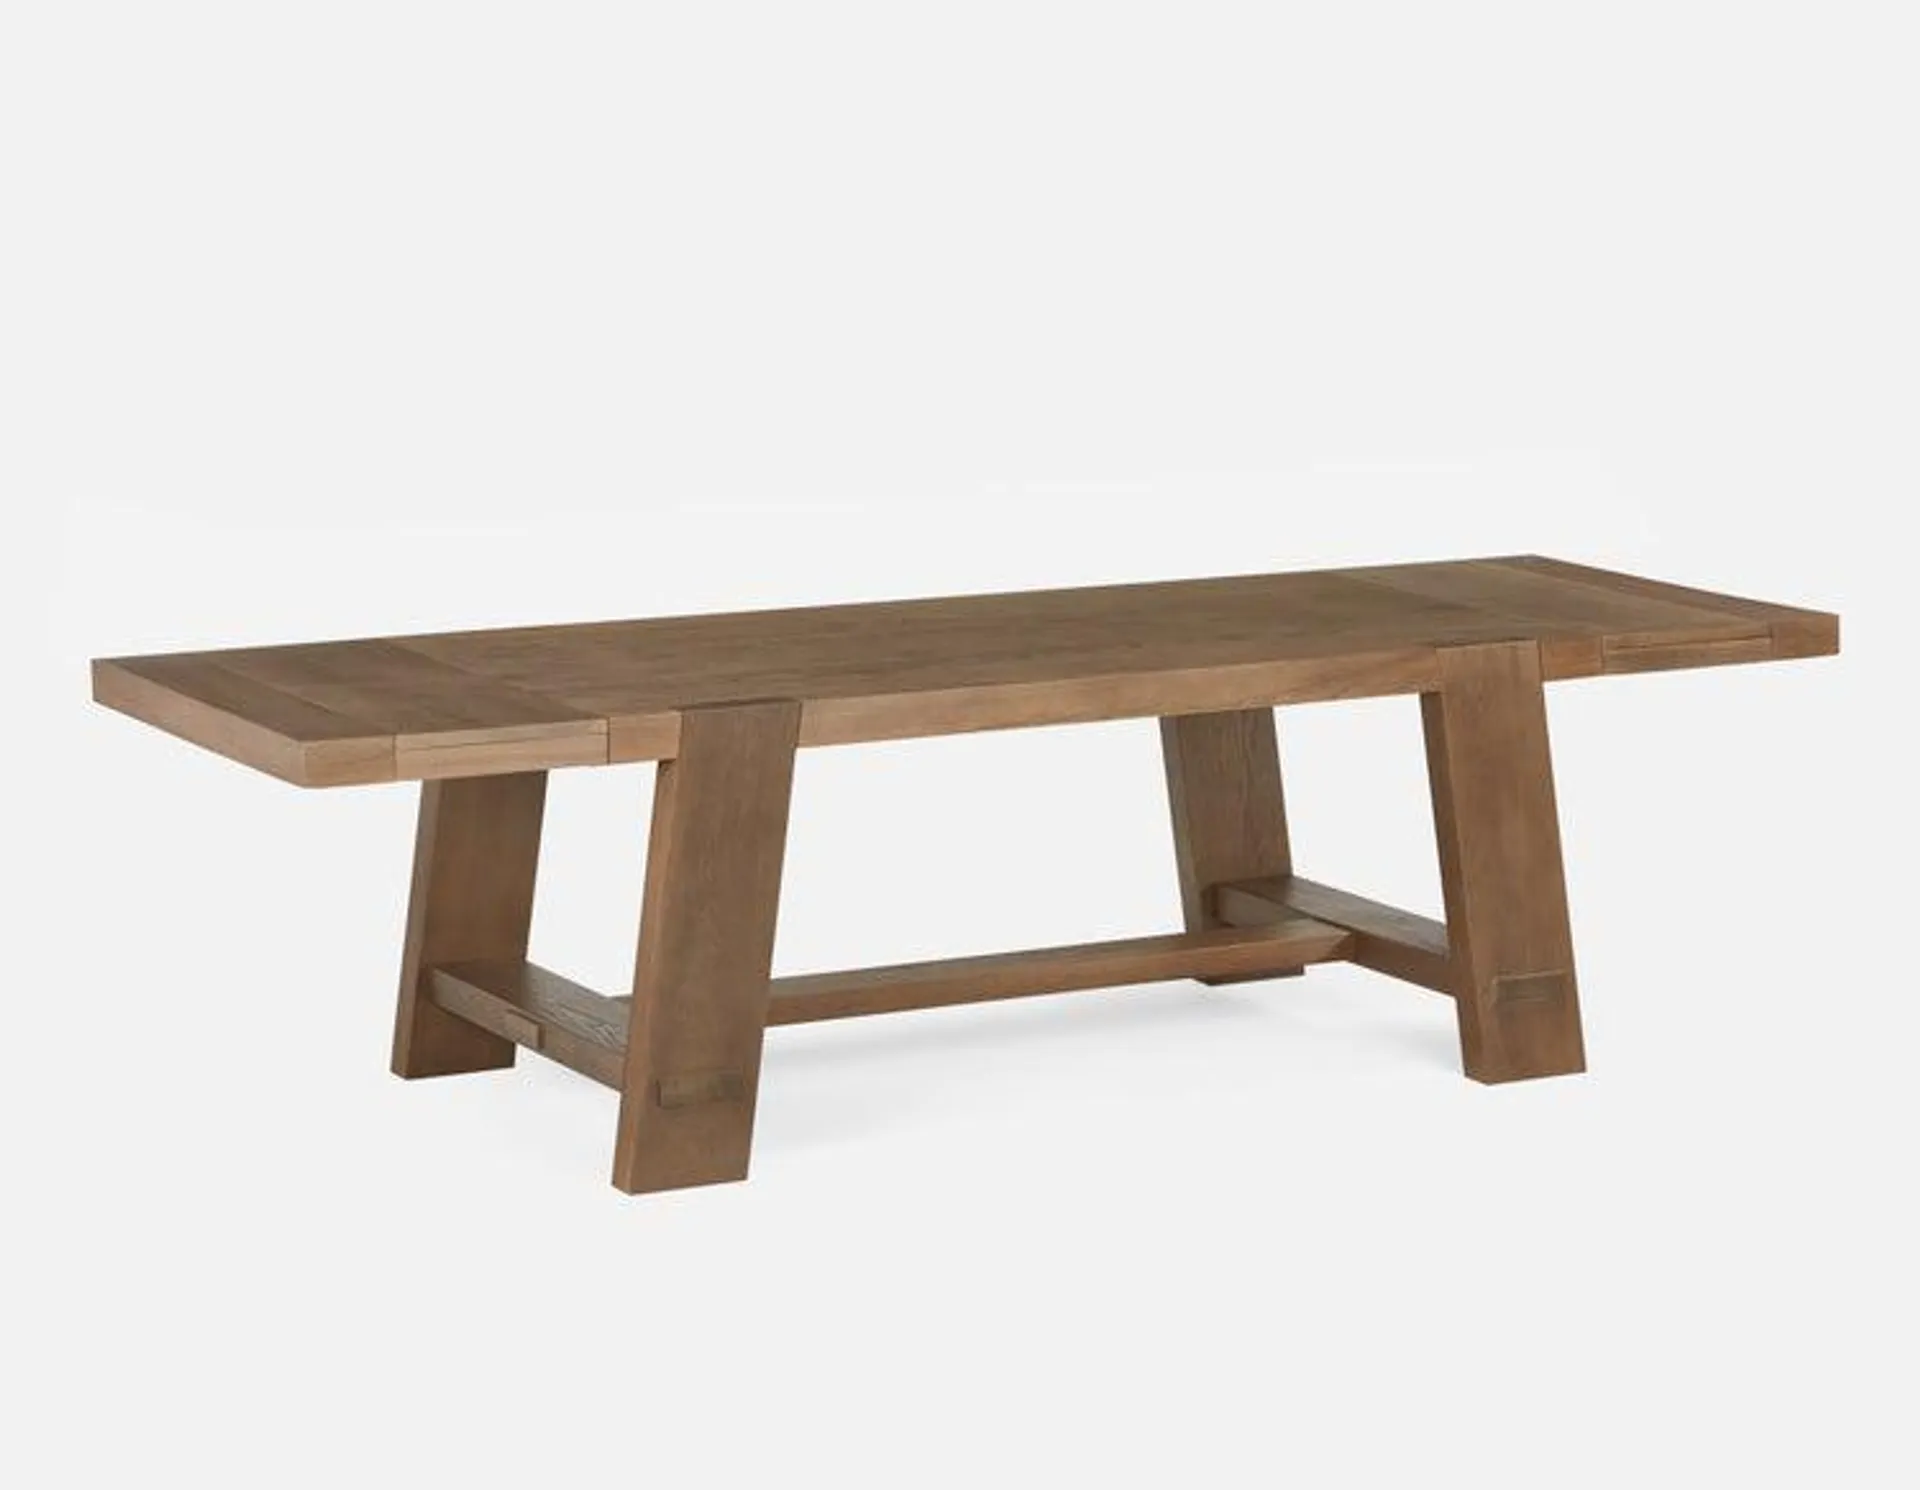 BELFORT extension dining table 214 cm to 281 cm